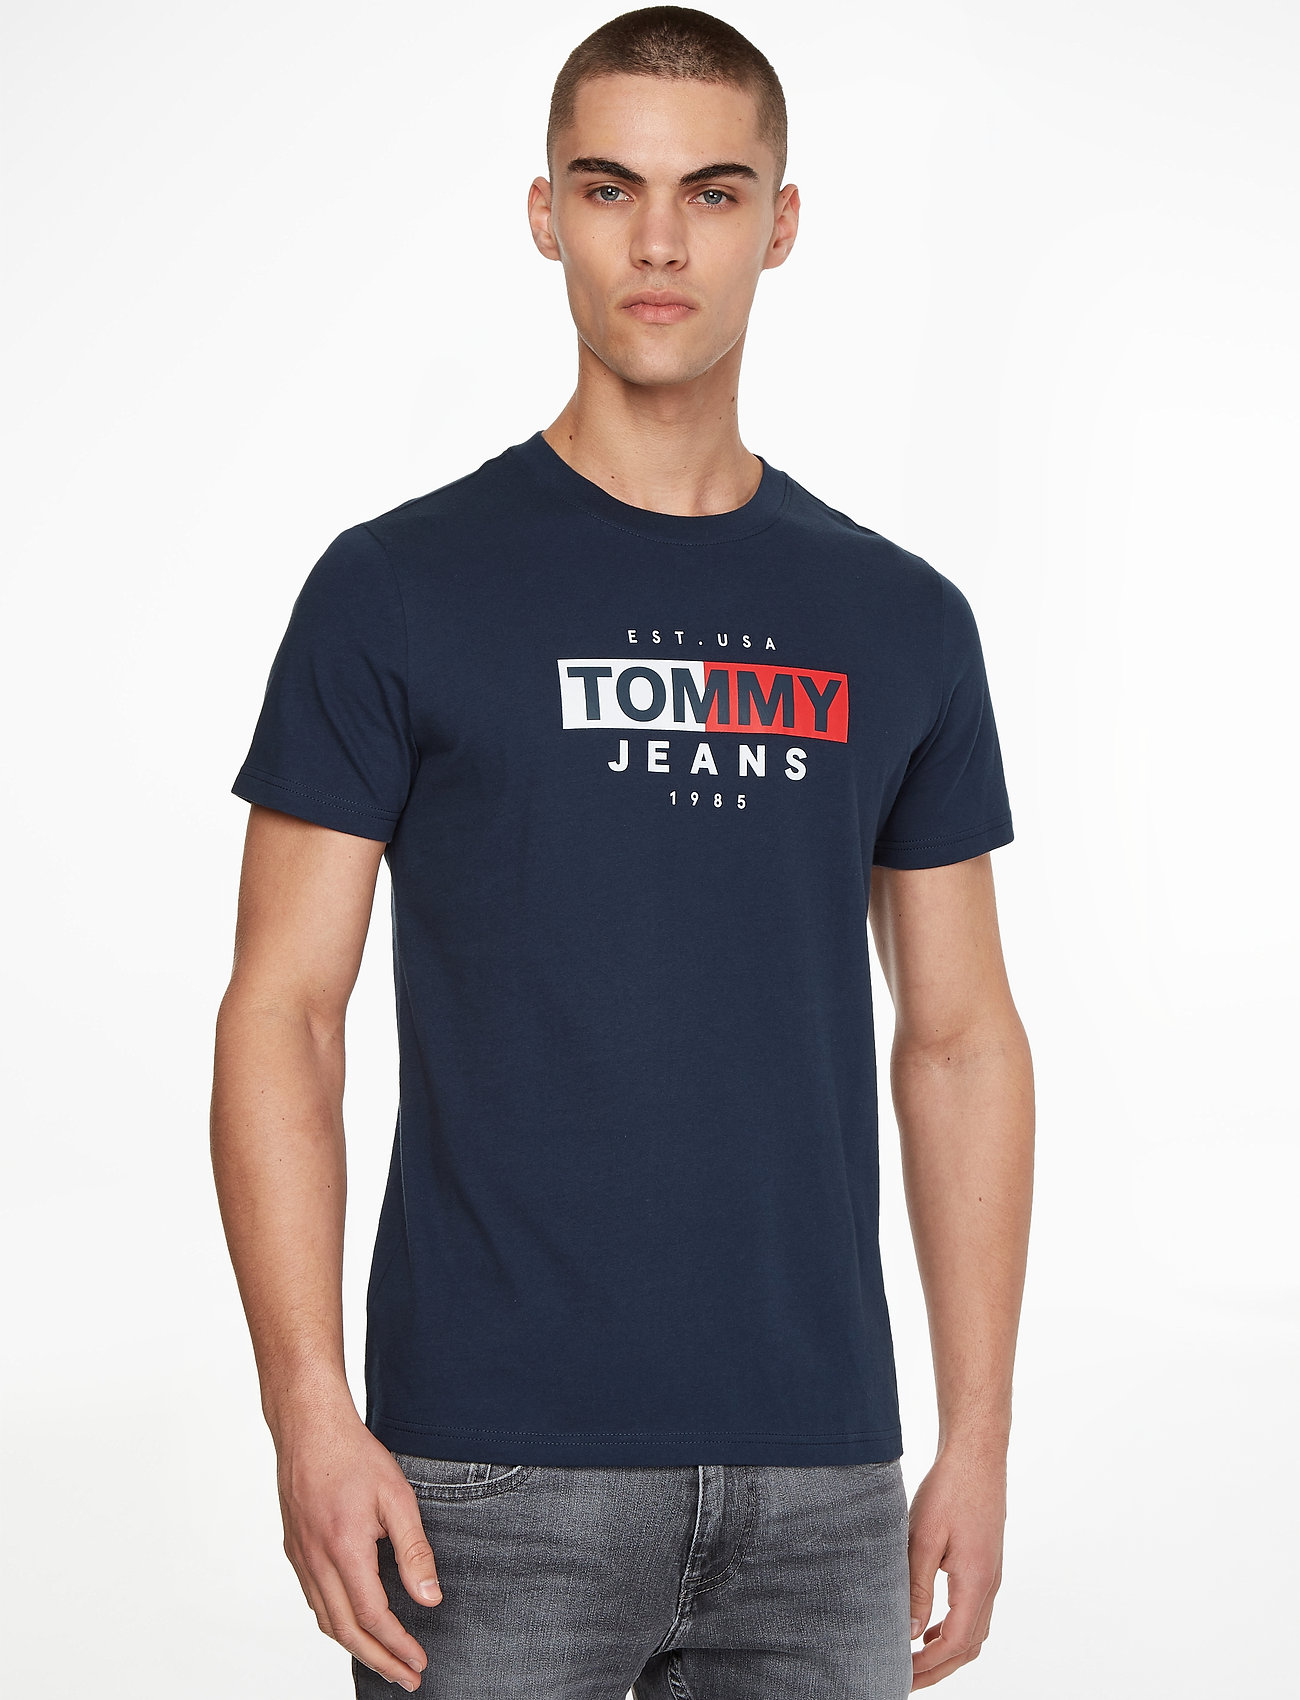 Tommy Jeans Tjm Entry Flag Tee - Vacation essentials | Boozt.com